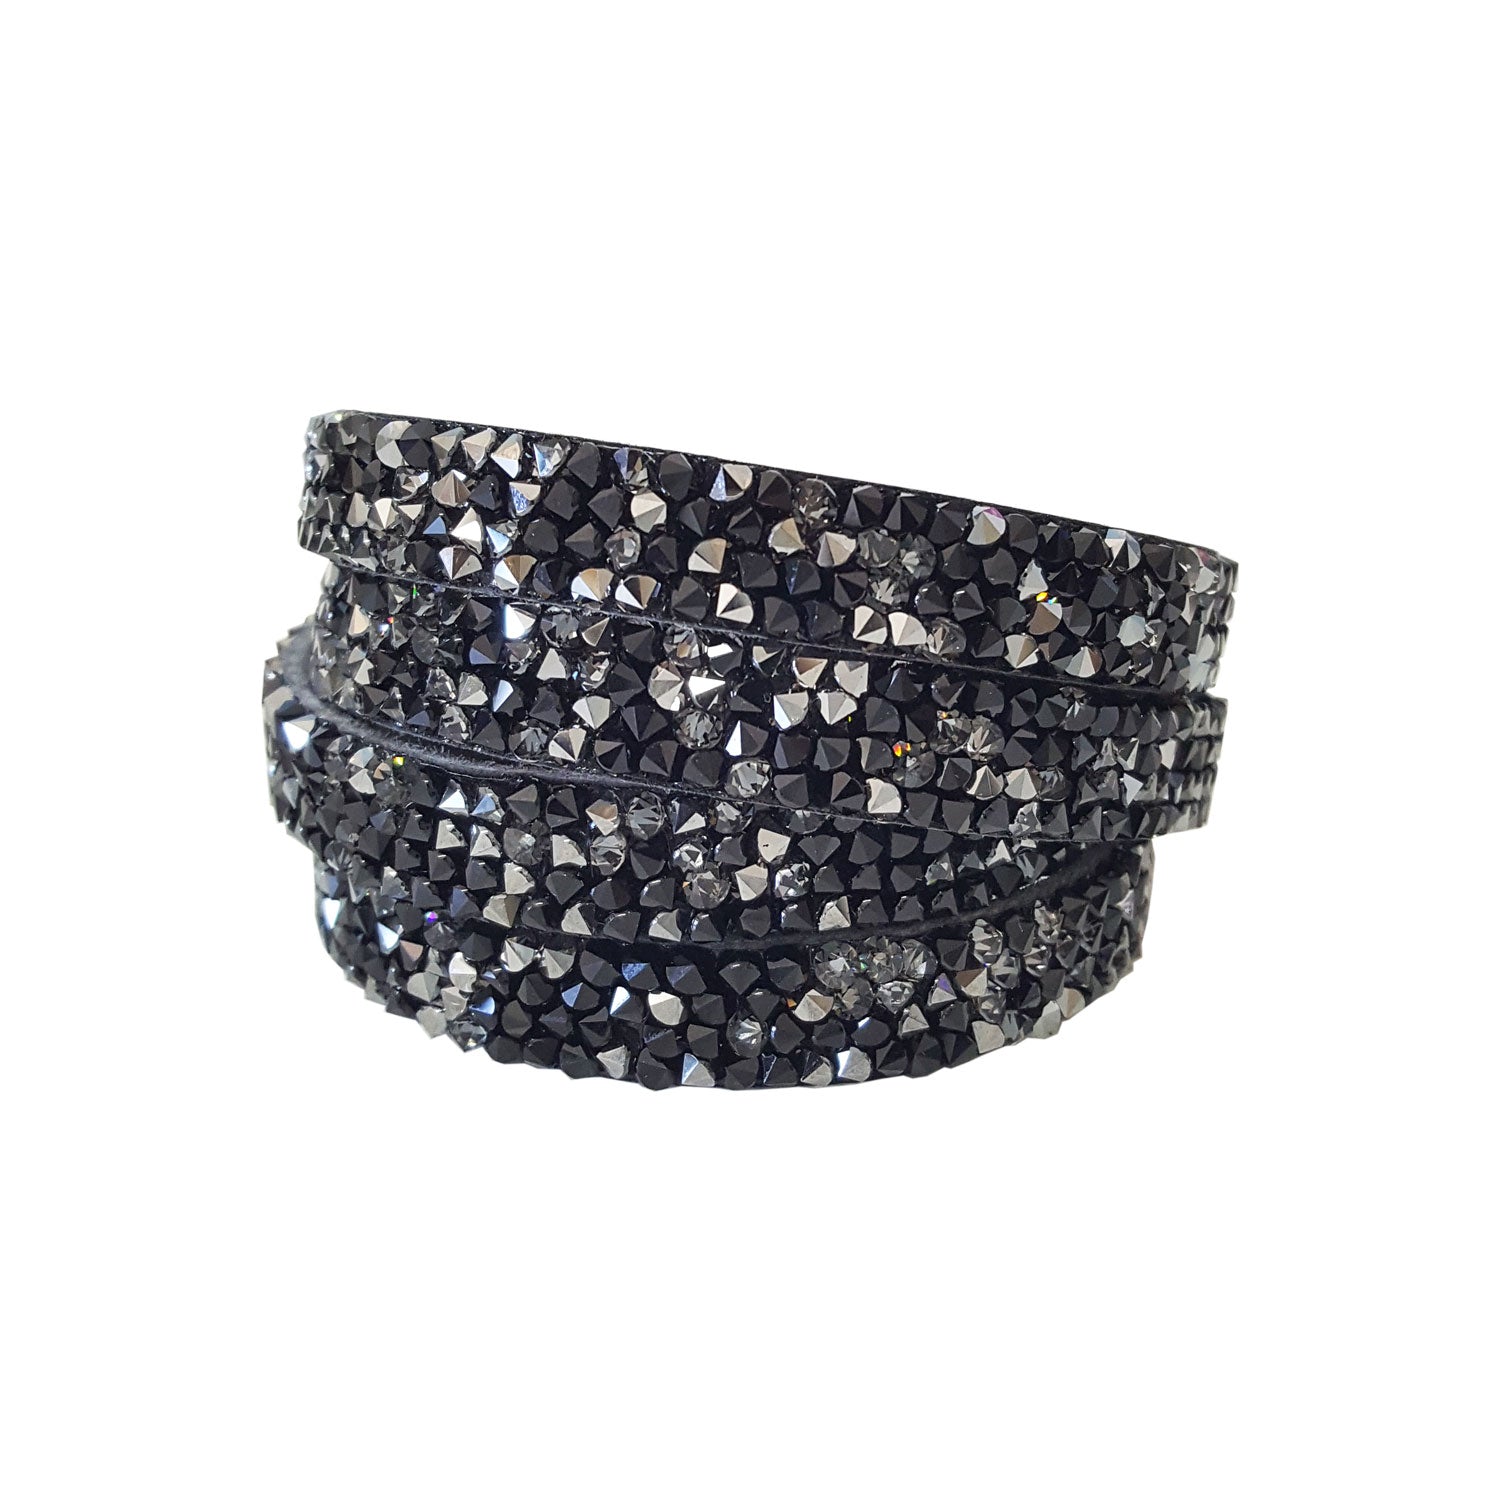 Amelia Bracelet in Genuine Leather with Crystals for Women